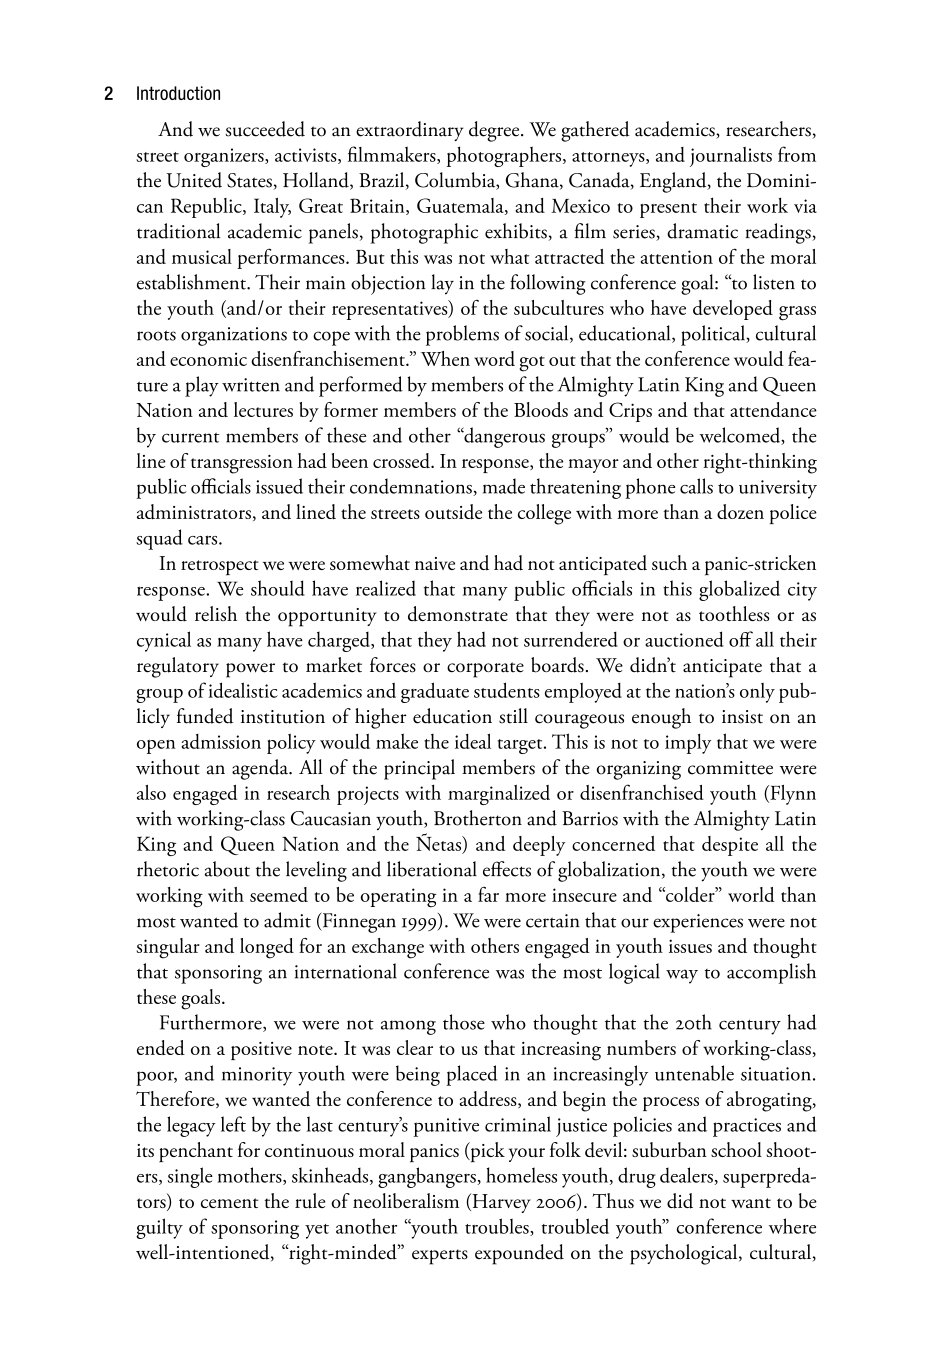 Globalizing the Streets: Cross-Cultural Perspectives on Youth, Social Control, and Empowerment page 2